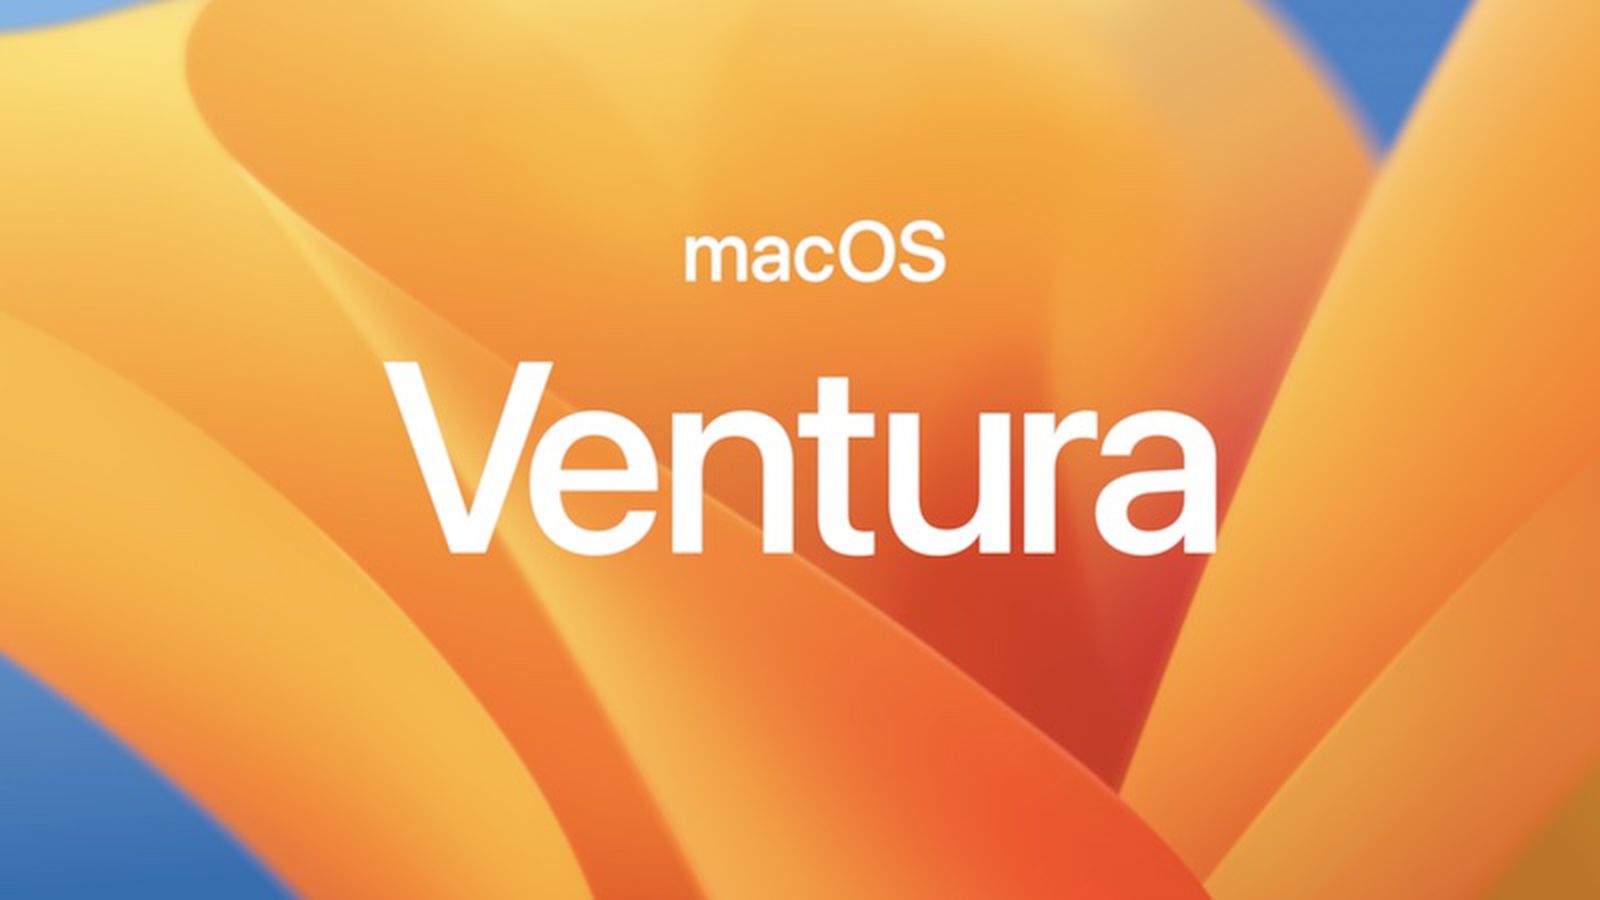 macOS Ventura: The Latest Operating System from Apple